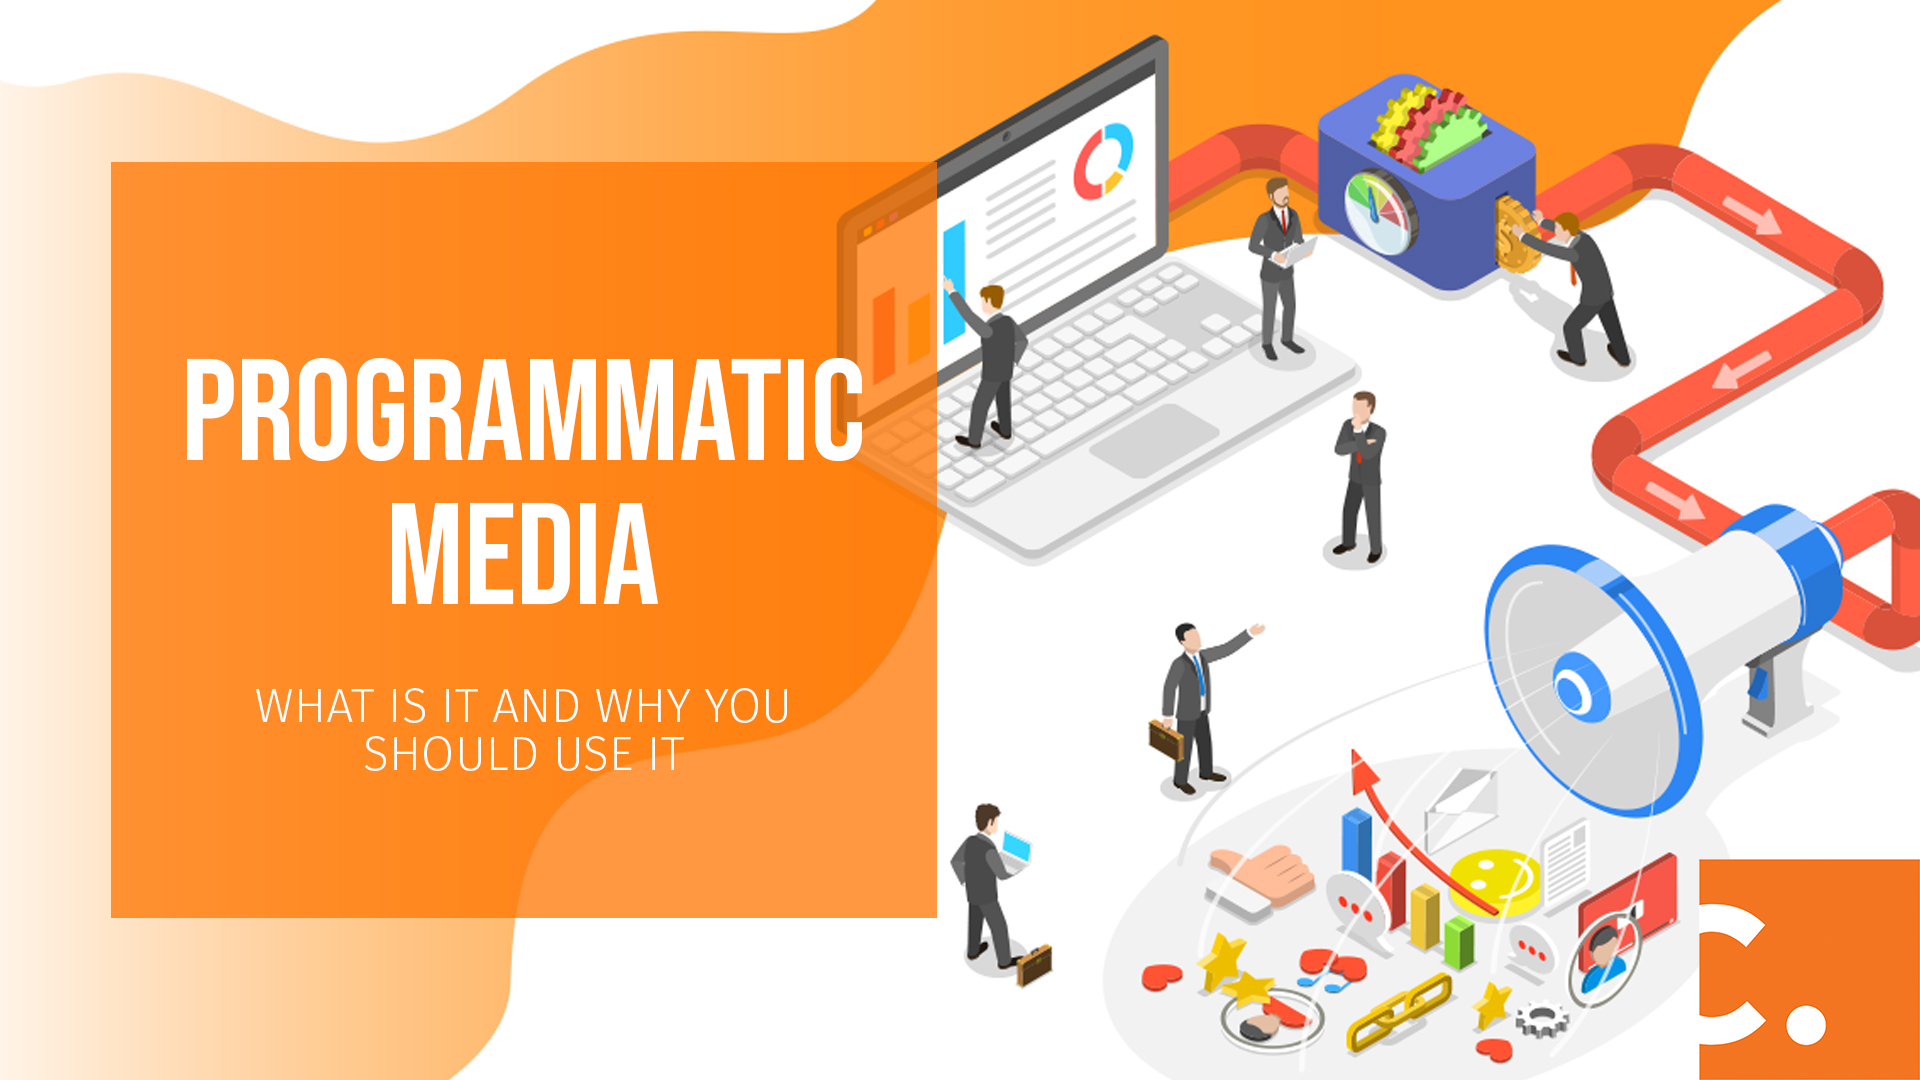 Programmatic Media: What Is It and Why You Should Use It